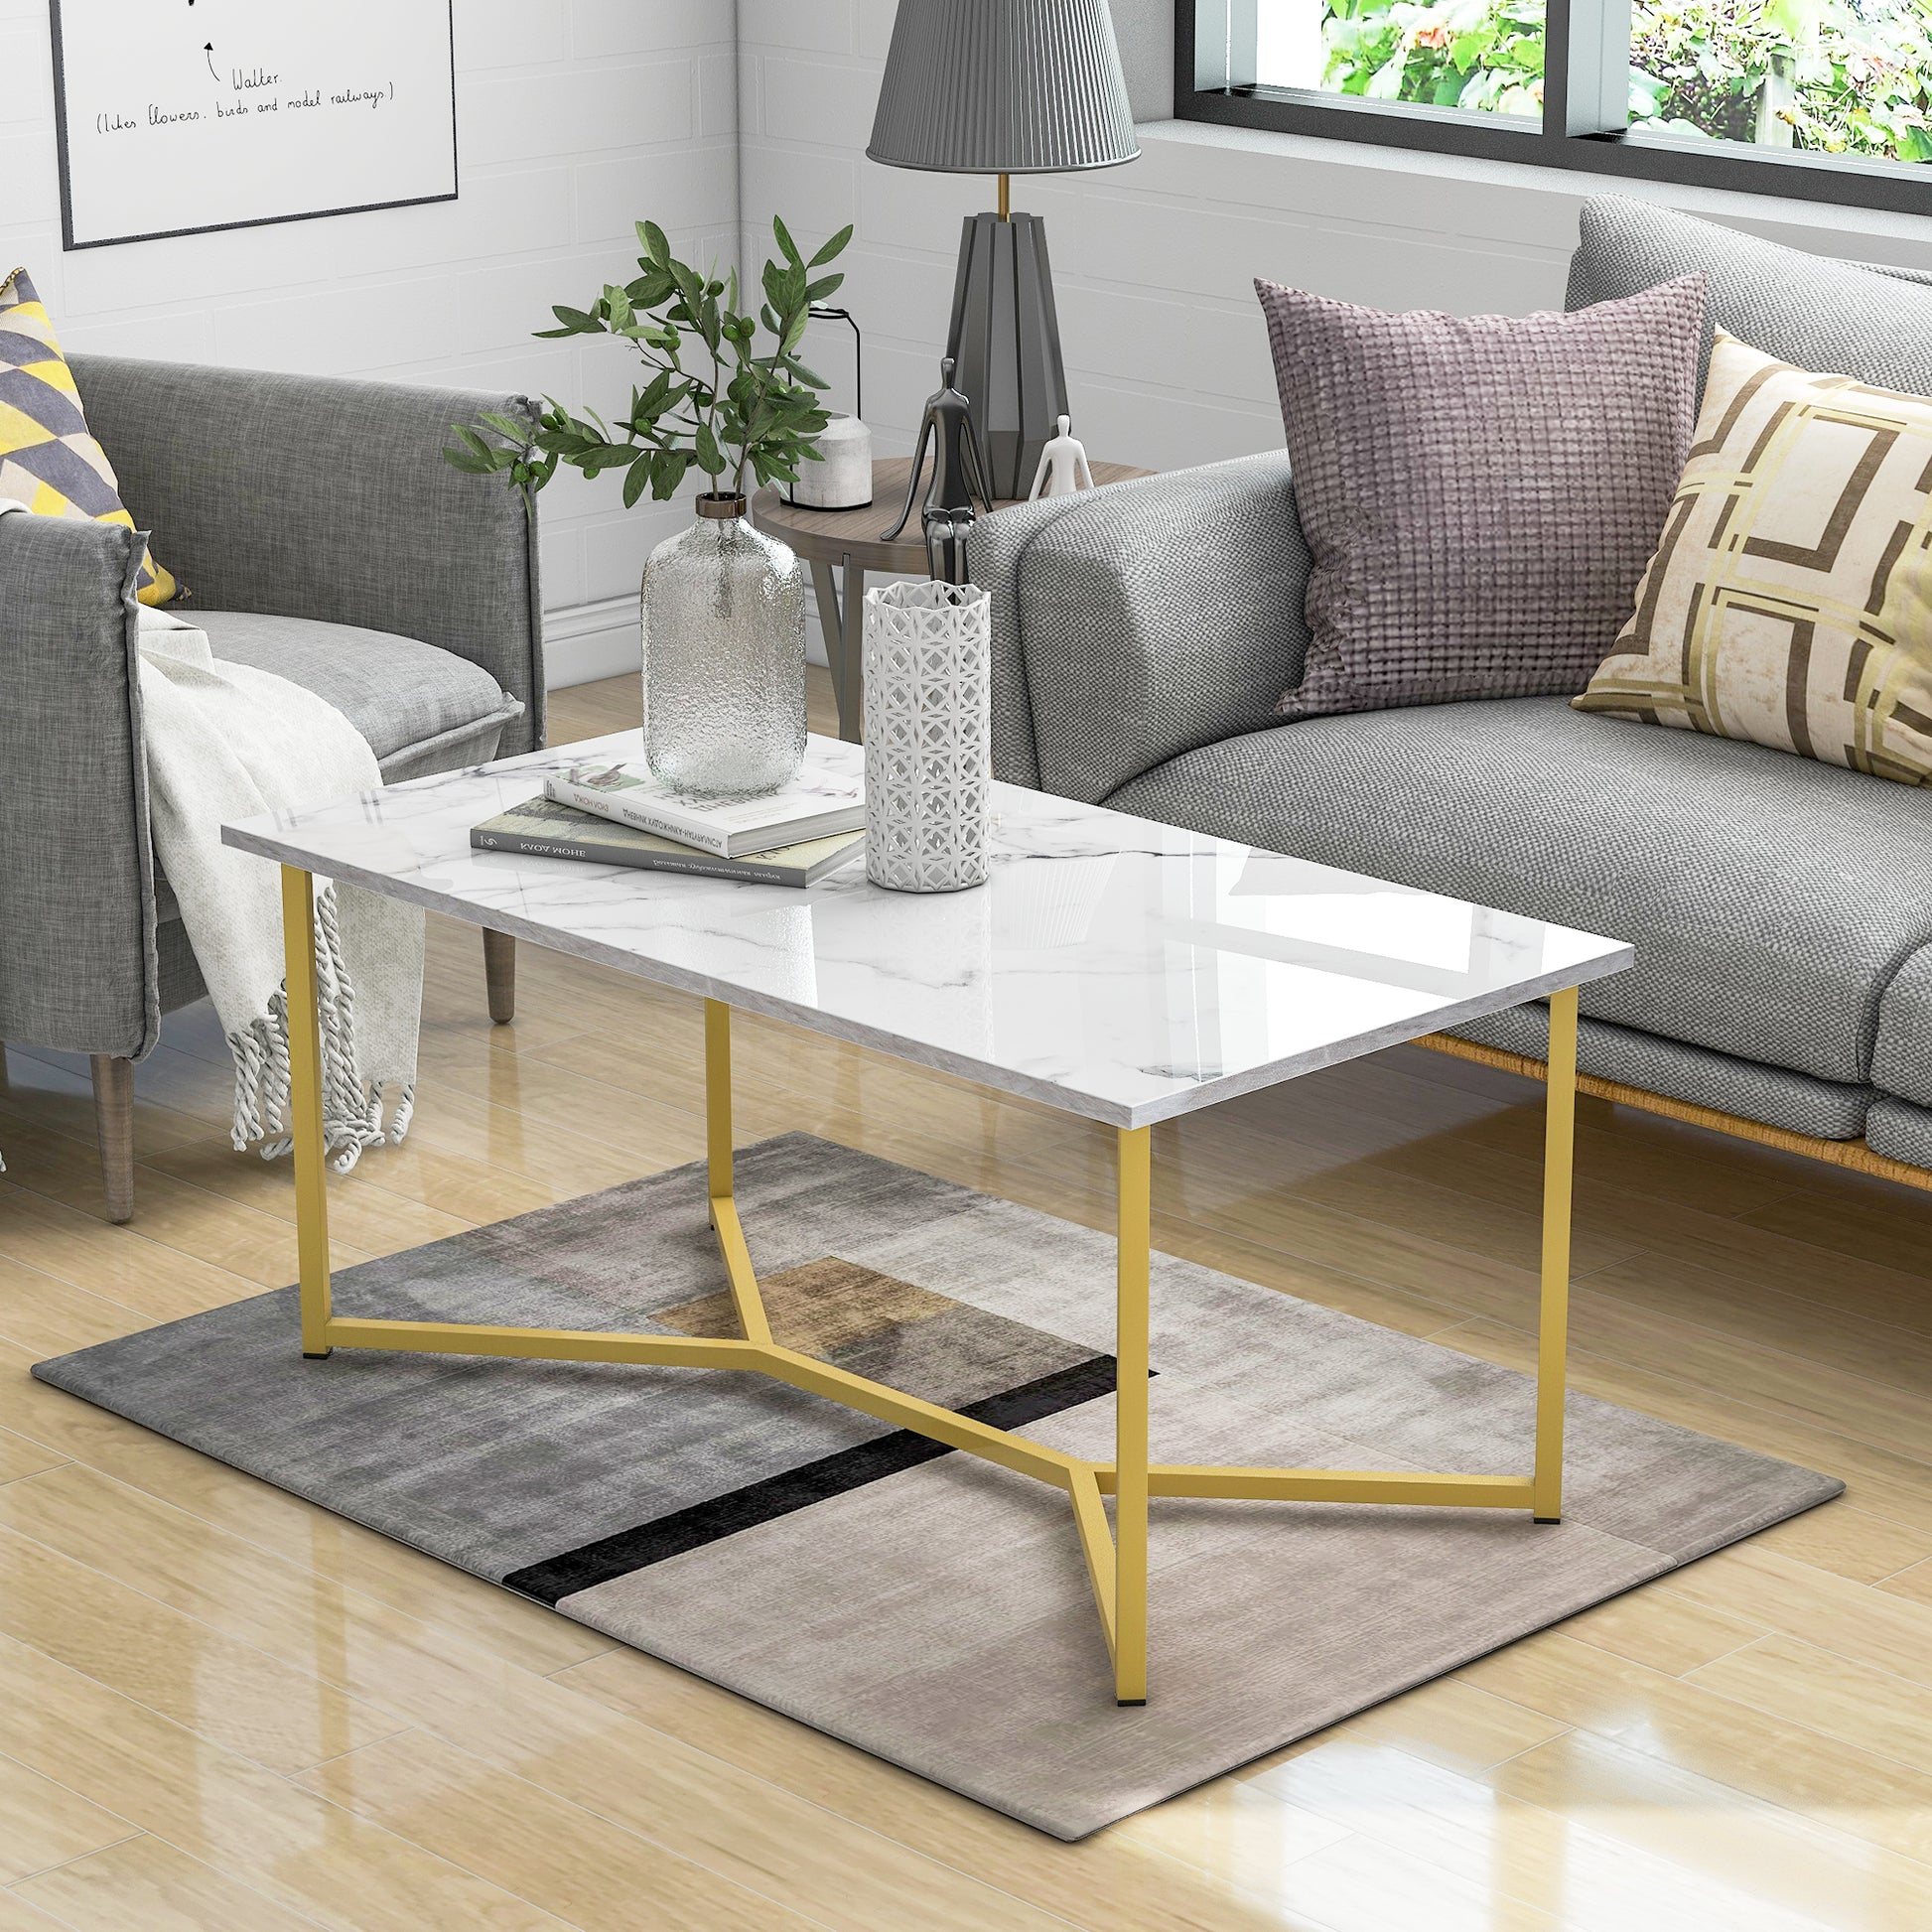 3 style modern rectangle wooden coffee table white marble top stylish x-leg base side table 42x22x18inch[